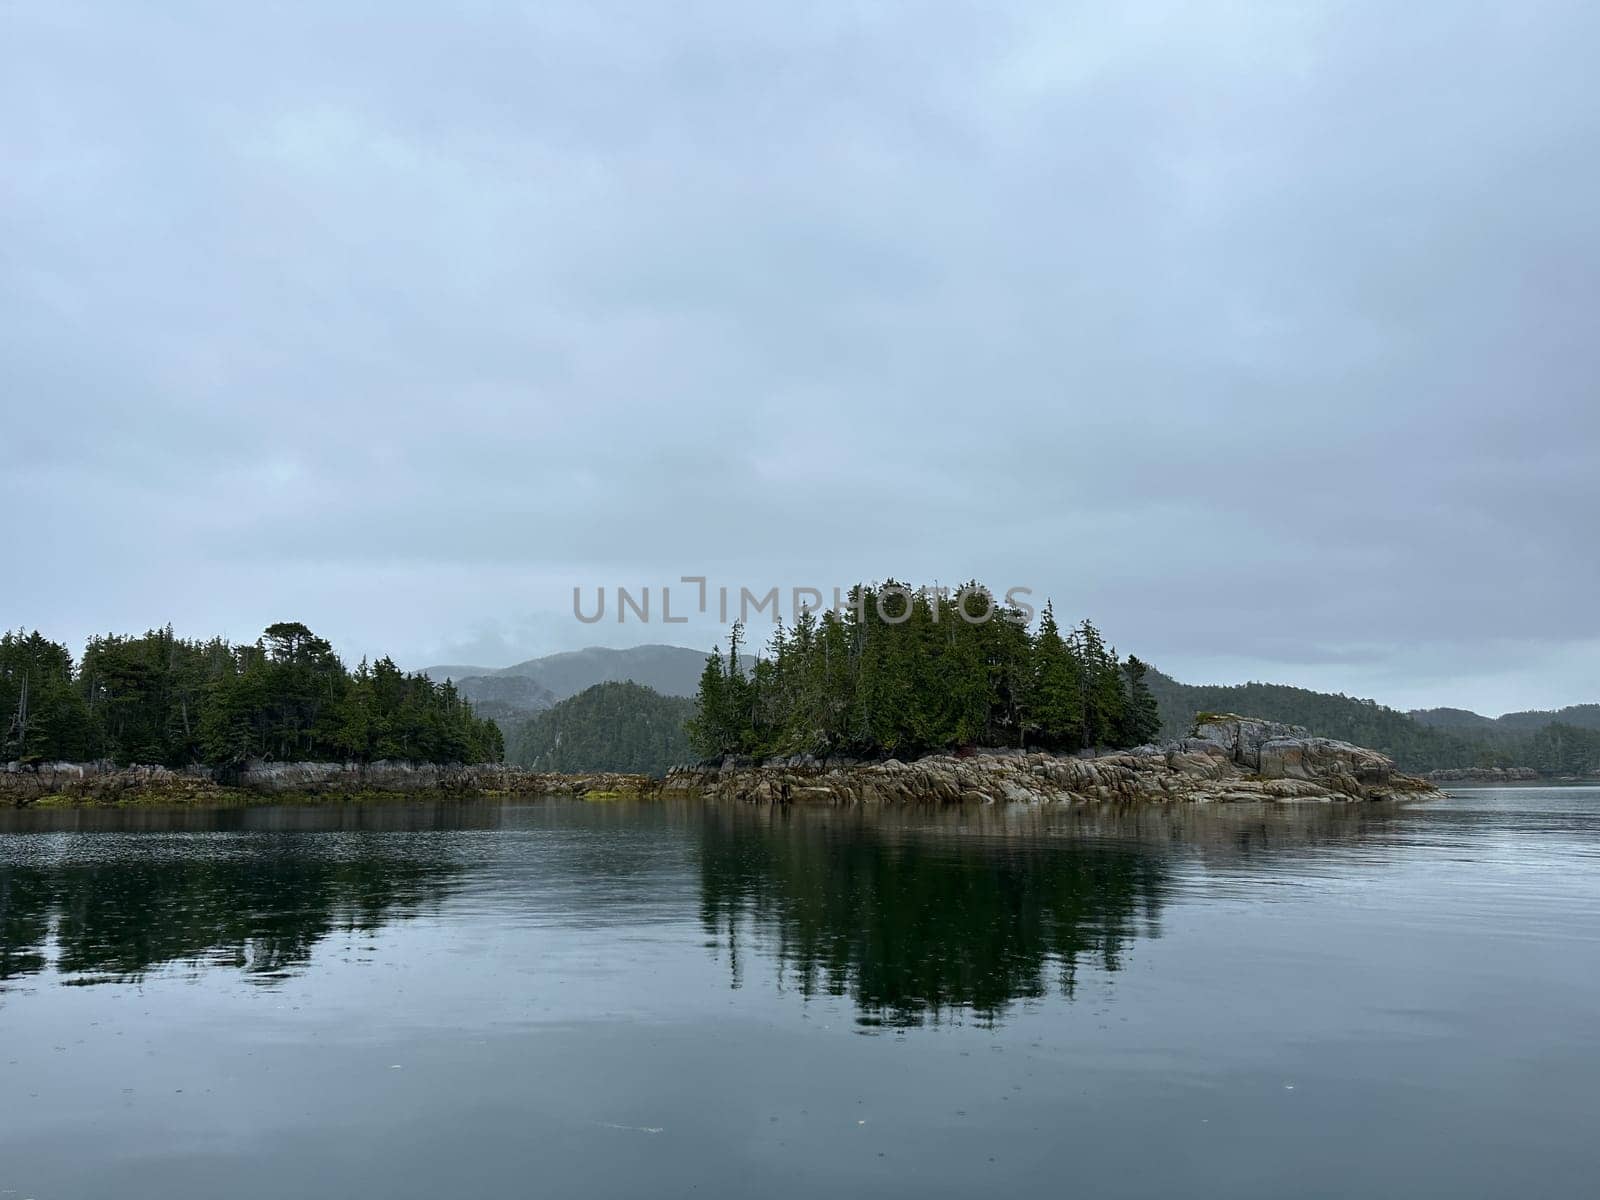 Scenic view of several islands along the Central Coast of British Columbia on an overcast and moody day. Near Stryker Island, British Columbia, Canada